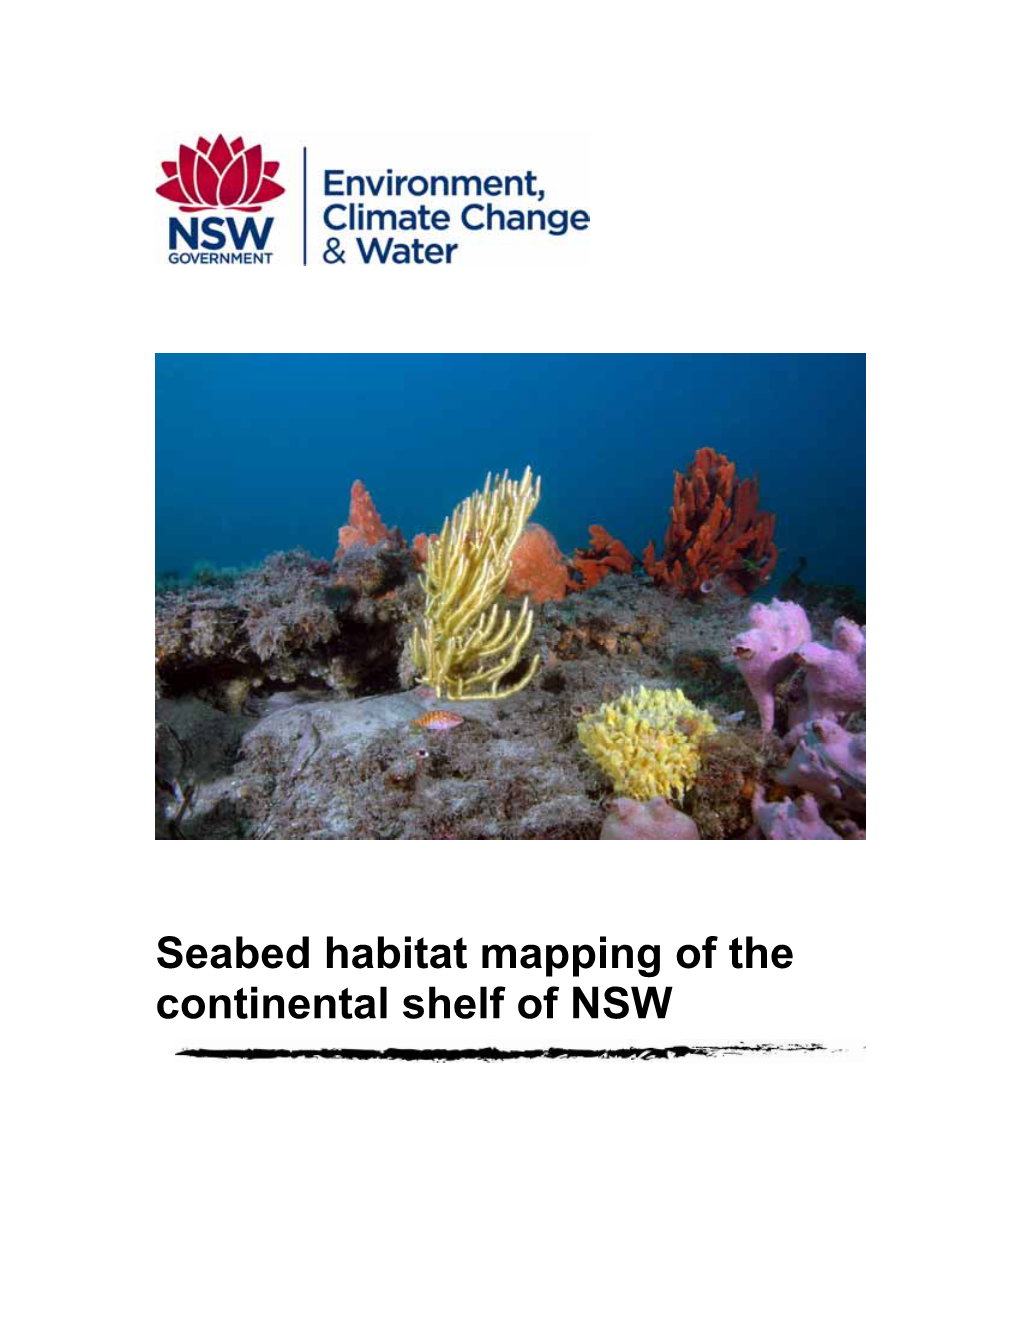 Seabed Habitat Mapping of the Continental Shelf of Nswdownload